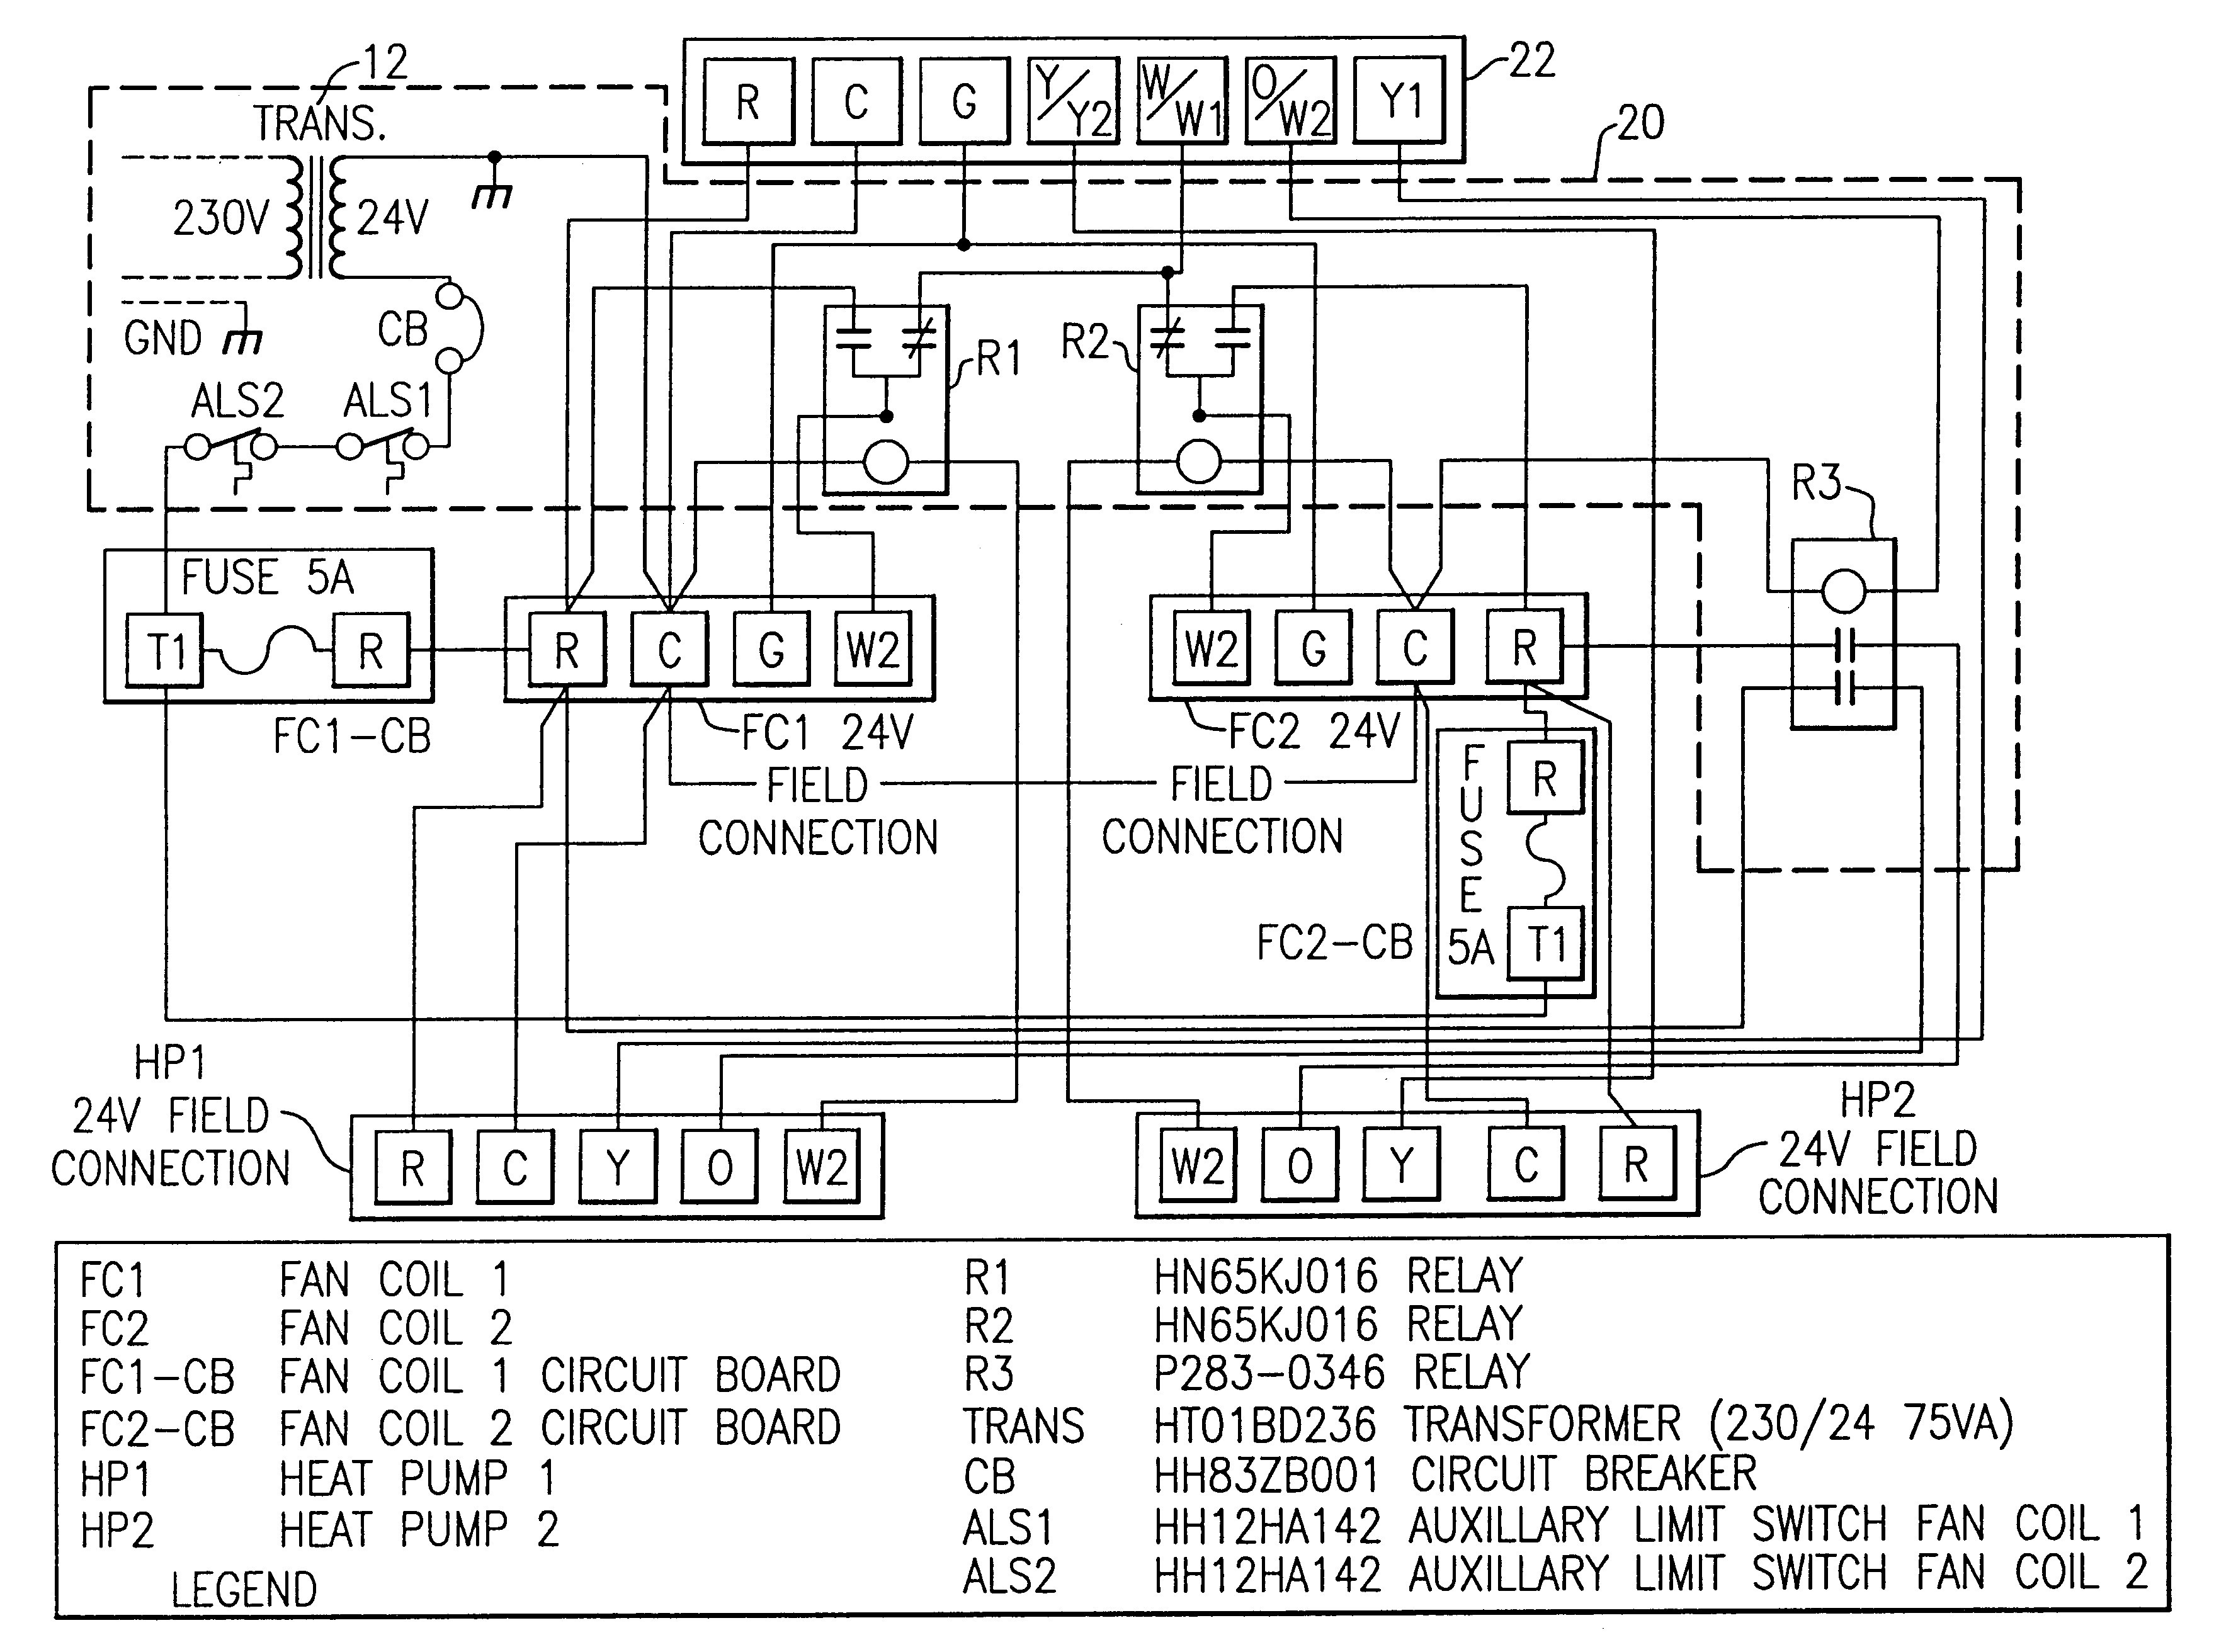 Amazing York 96 2 Stage Furnace Wiring Diagram s Electrical